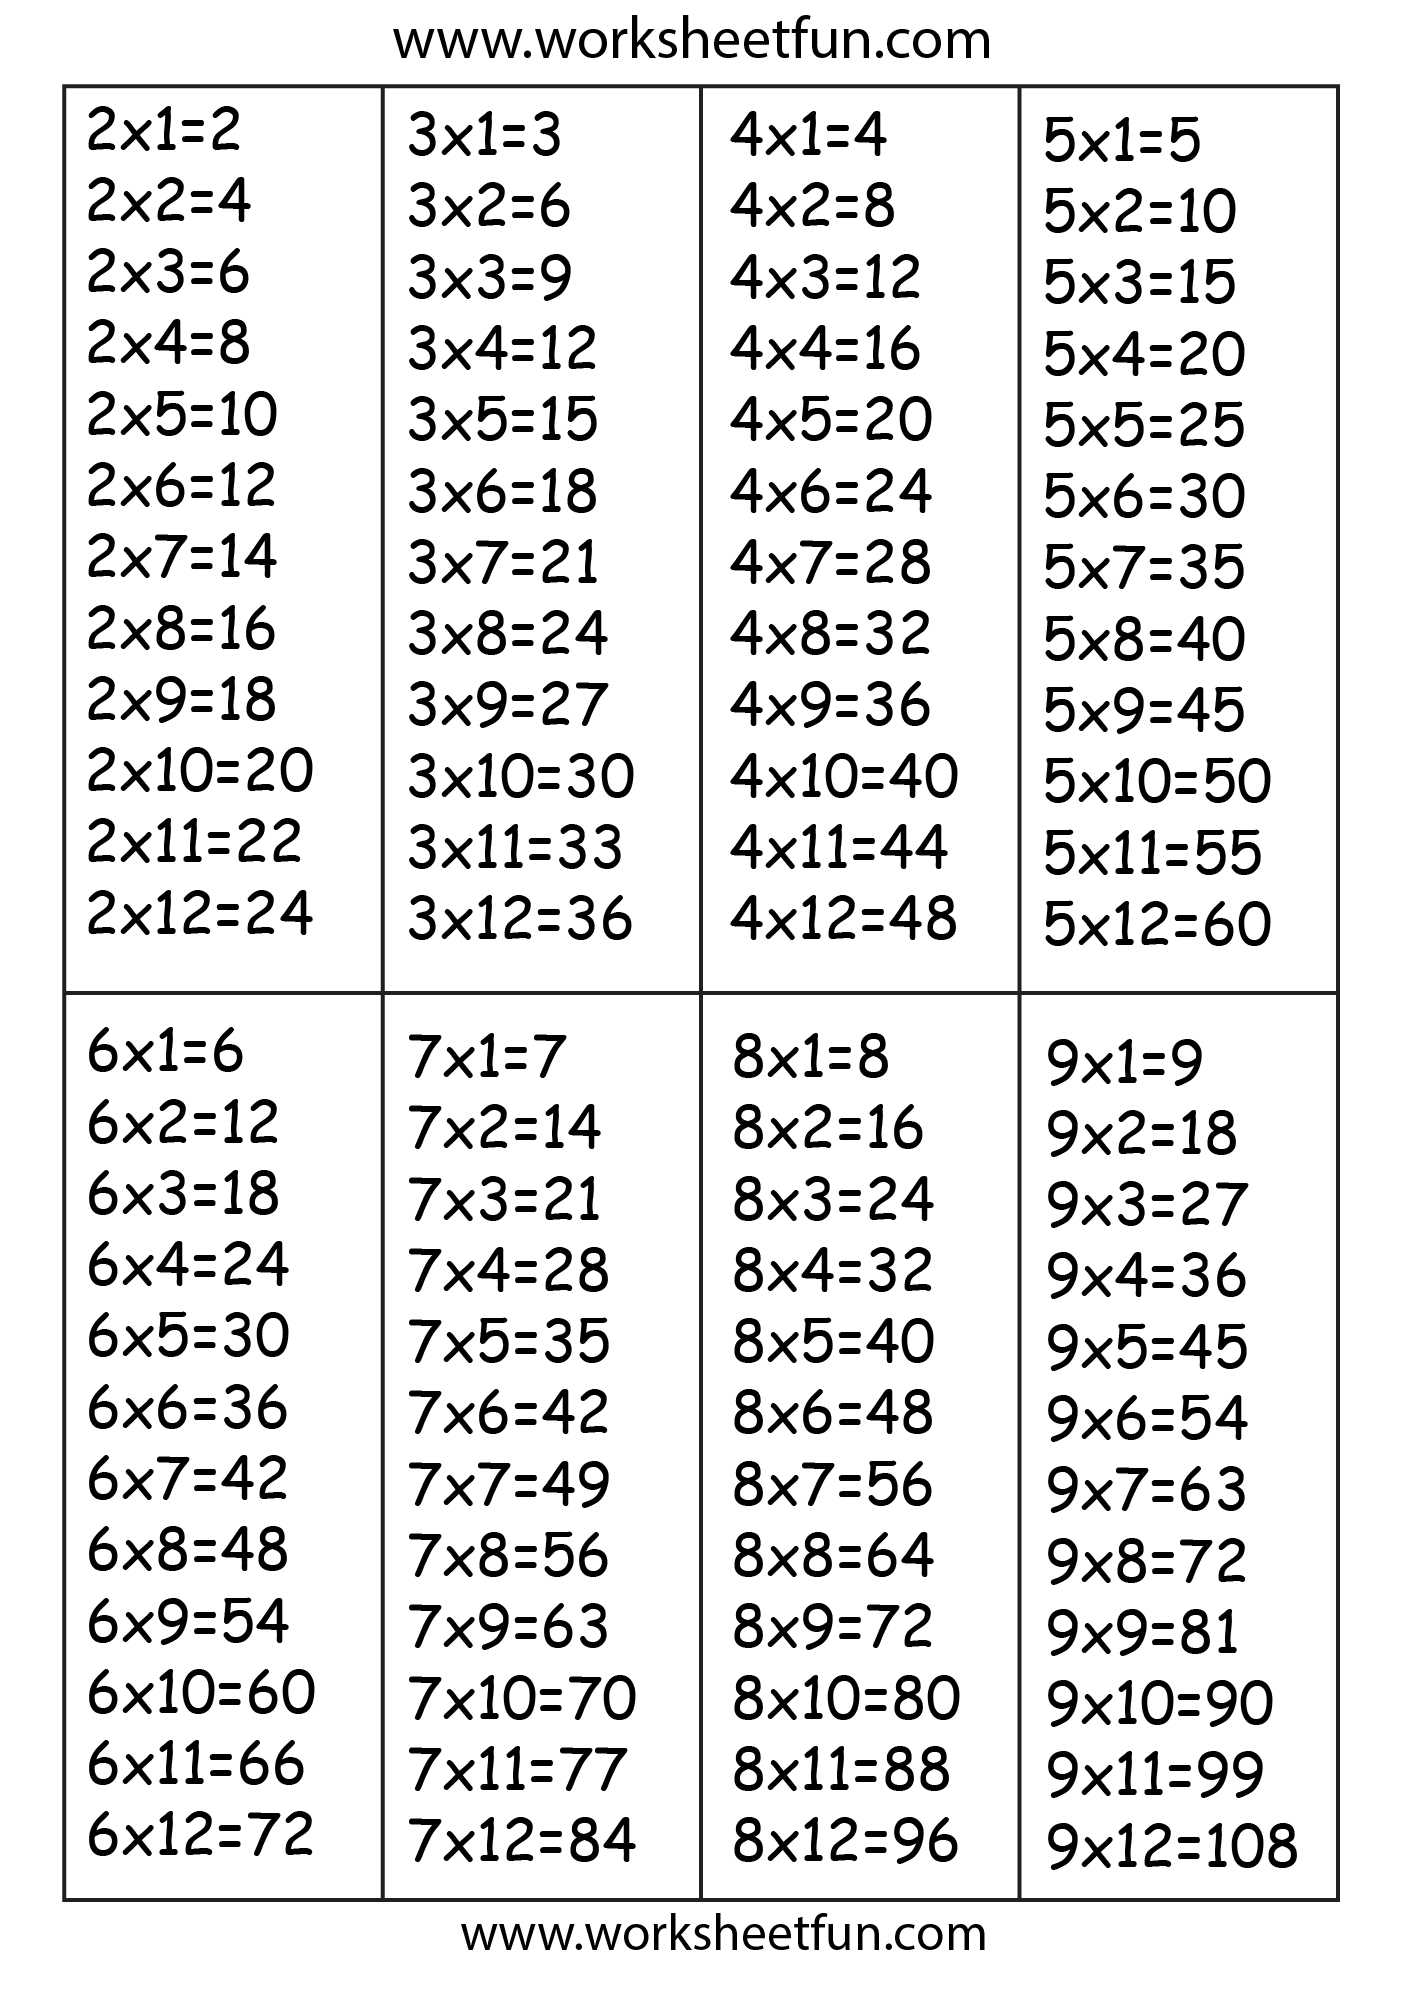 Square Root Worksheets 8th Grade Pdf Also Times Table Chart – 2 3 4 5 6 7 8 & 9 Free Printable